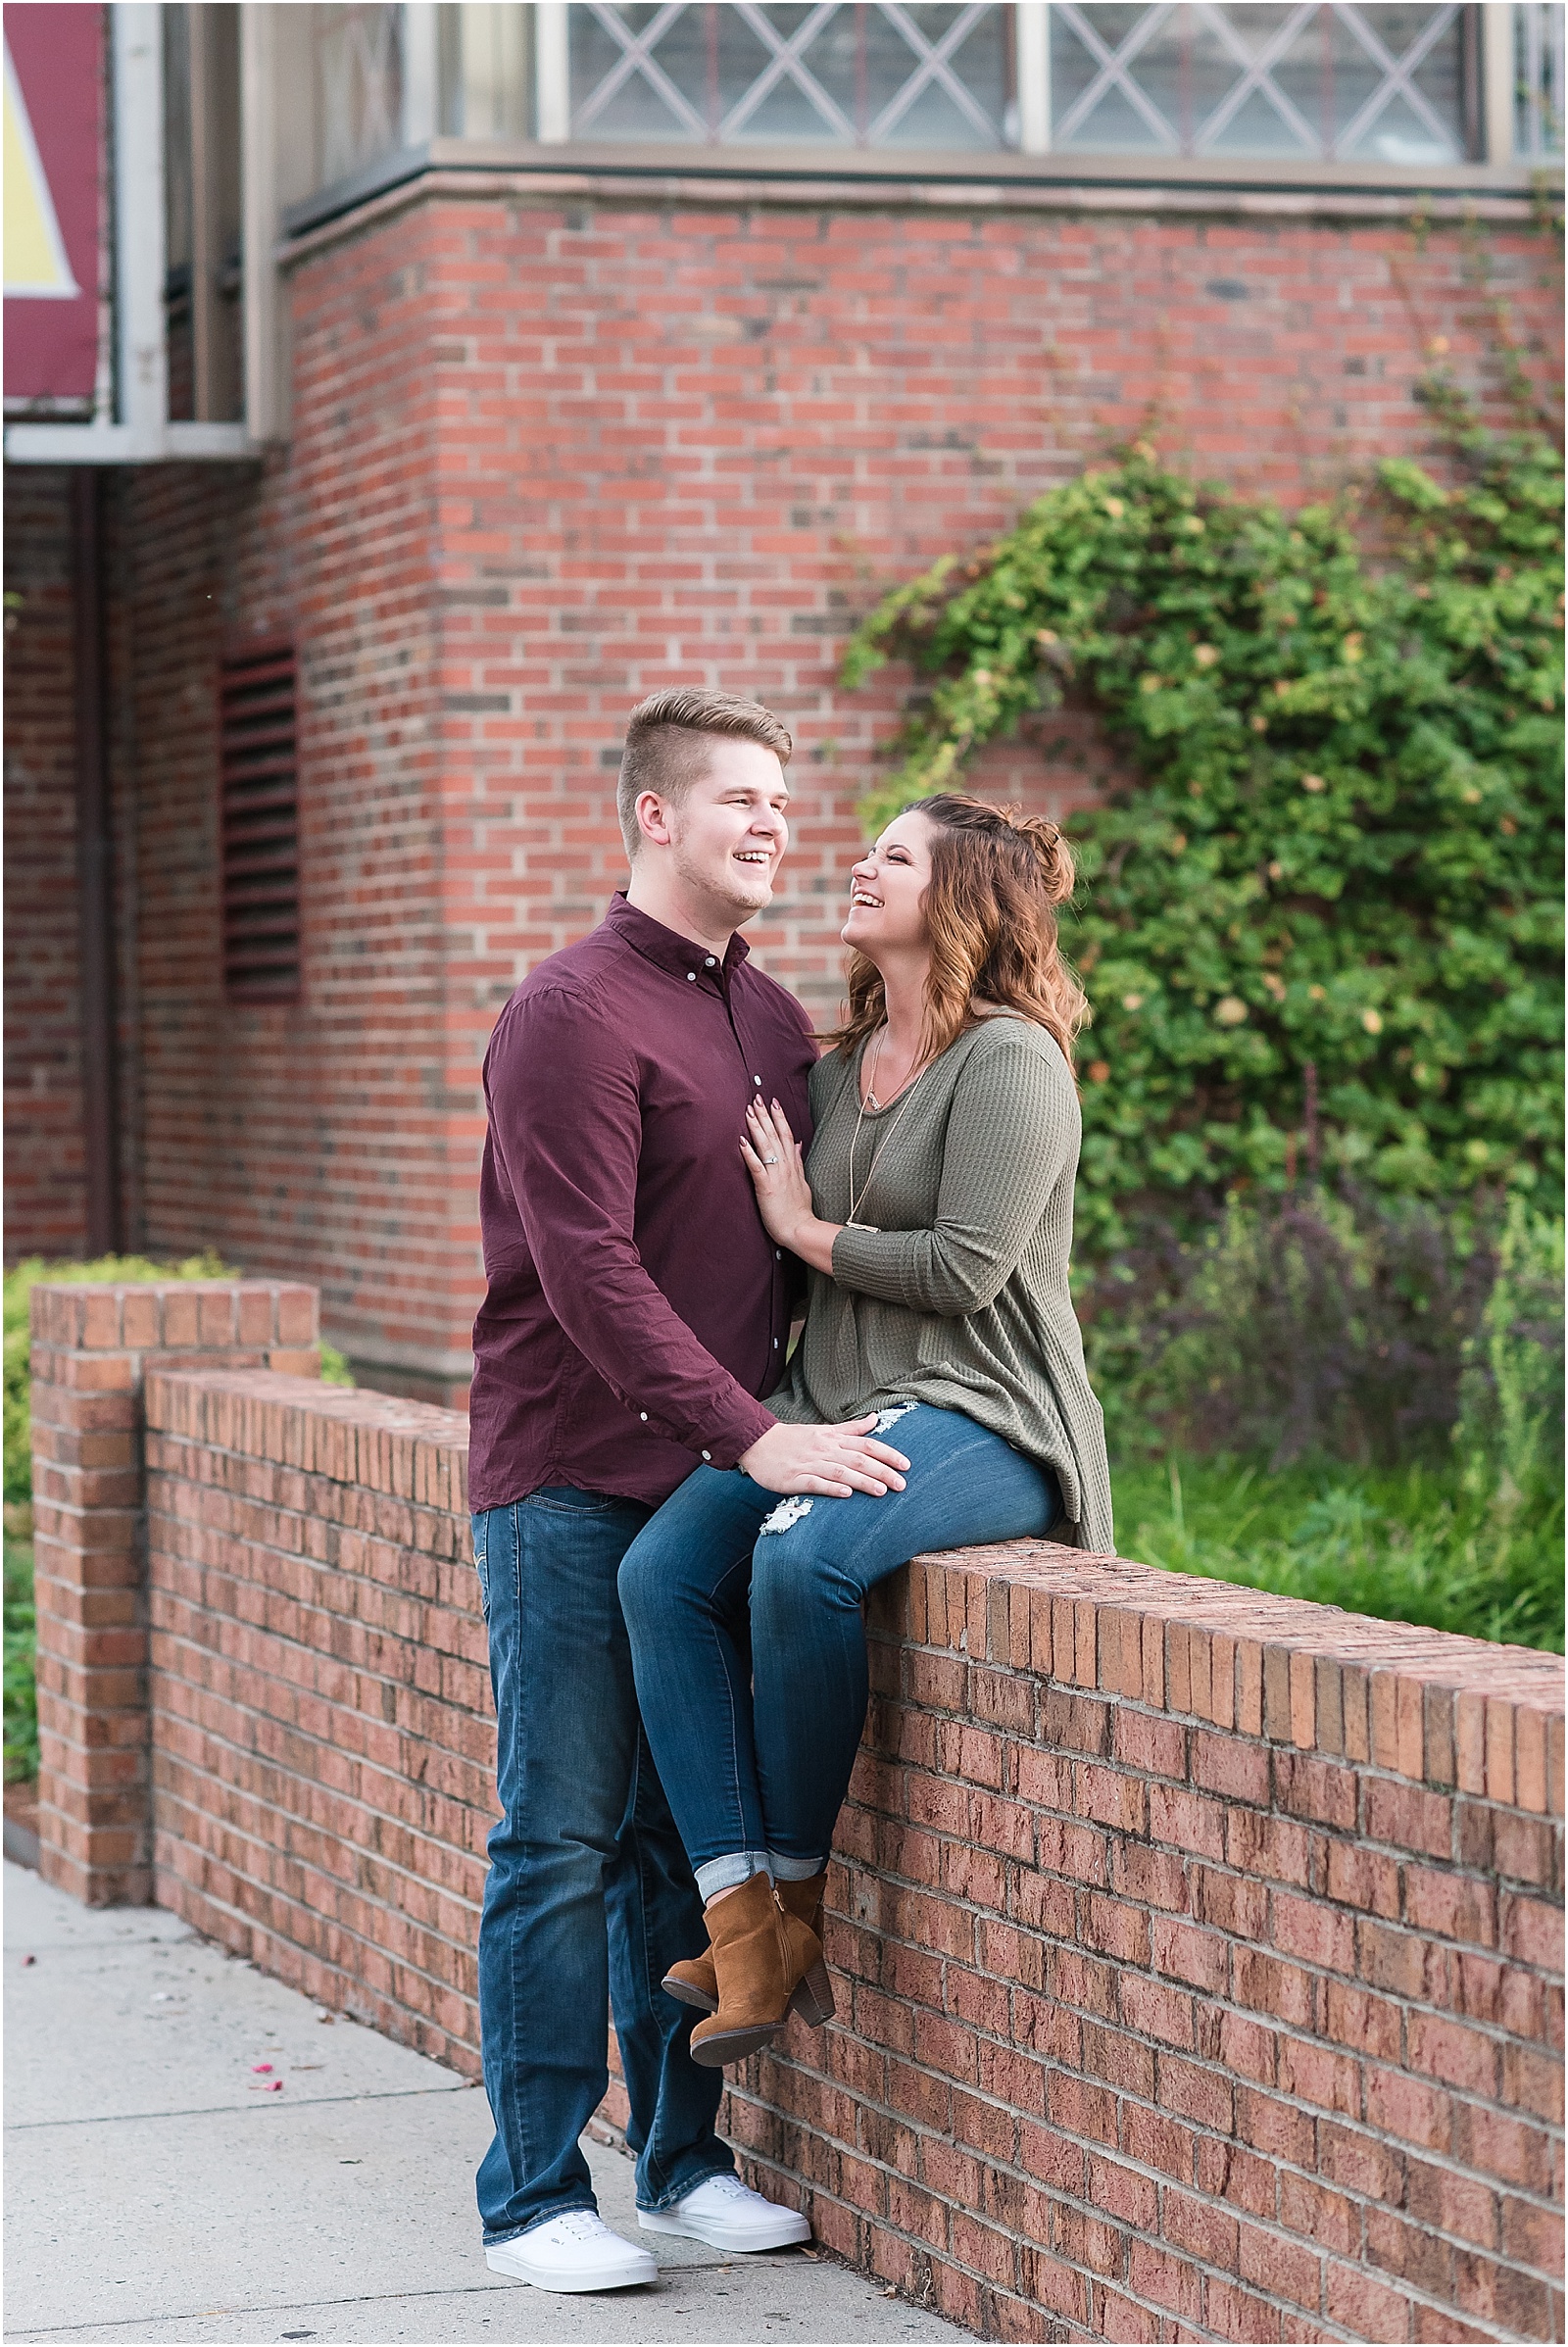 michelle and sara photography, downtown engagement session, downtown greensboro, downtown greensboro engagement session, laughing photography, 